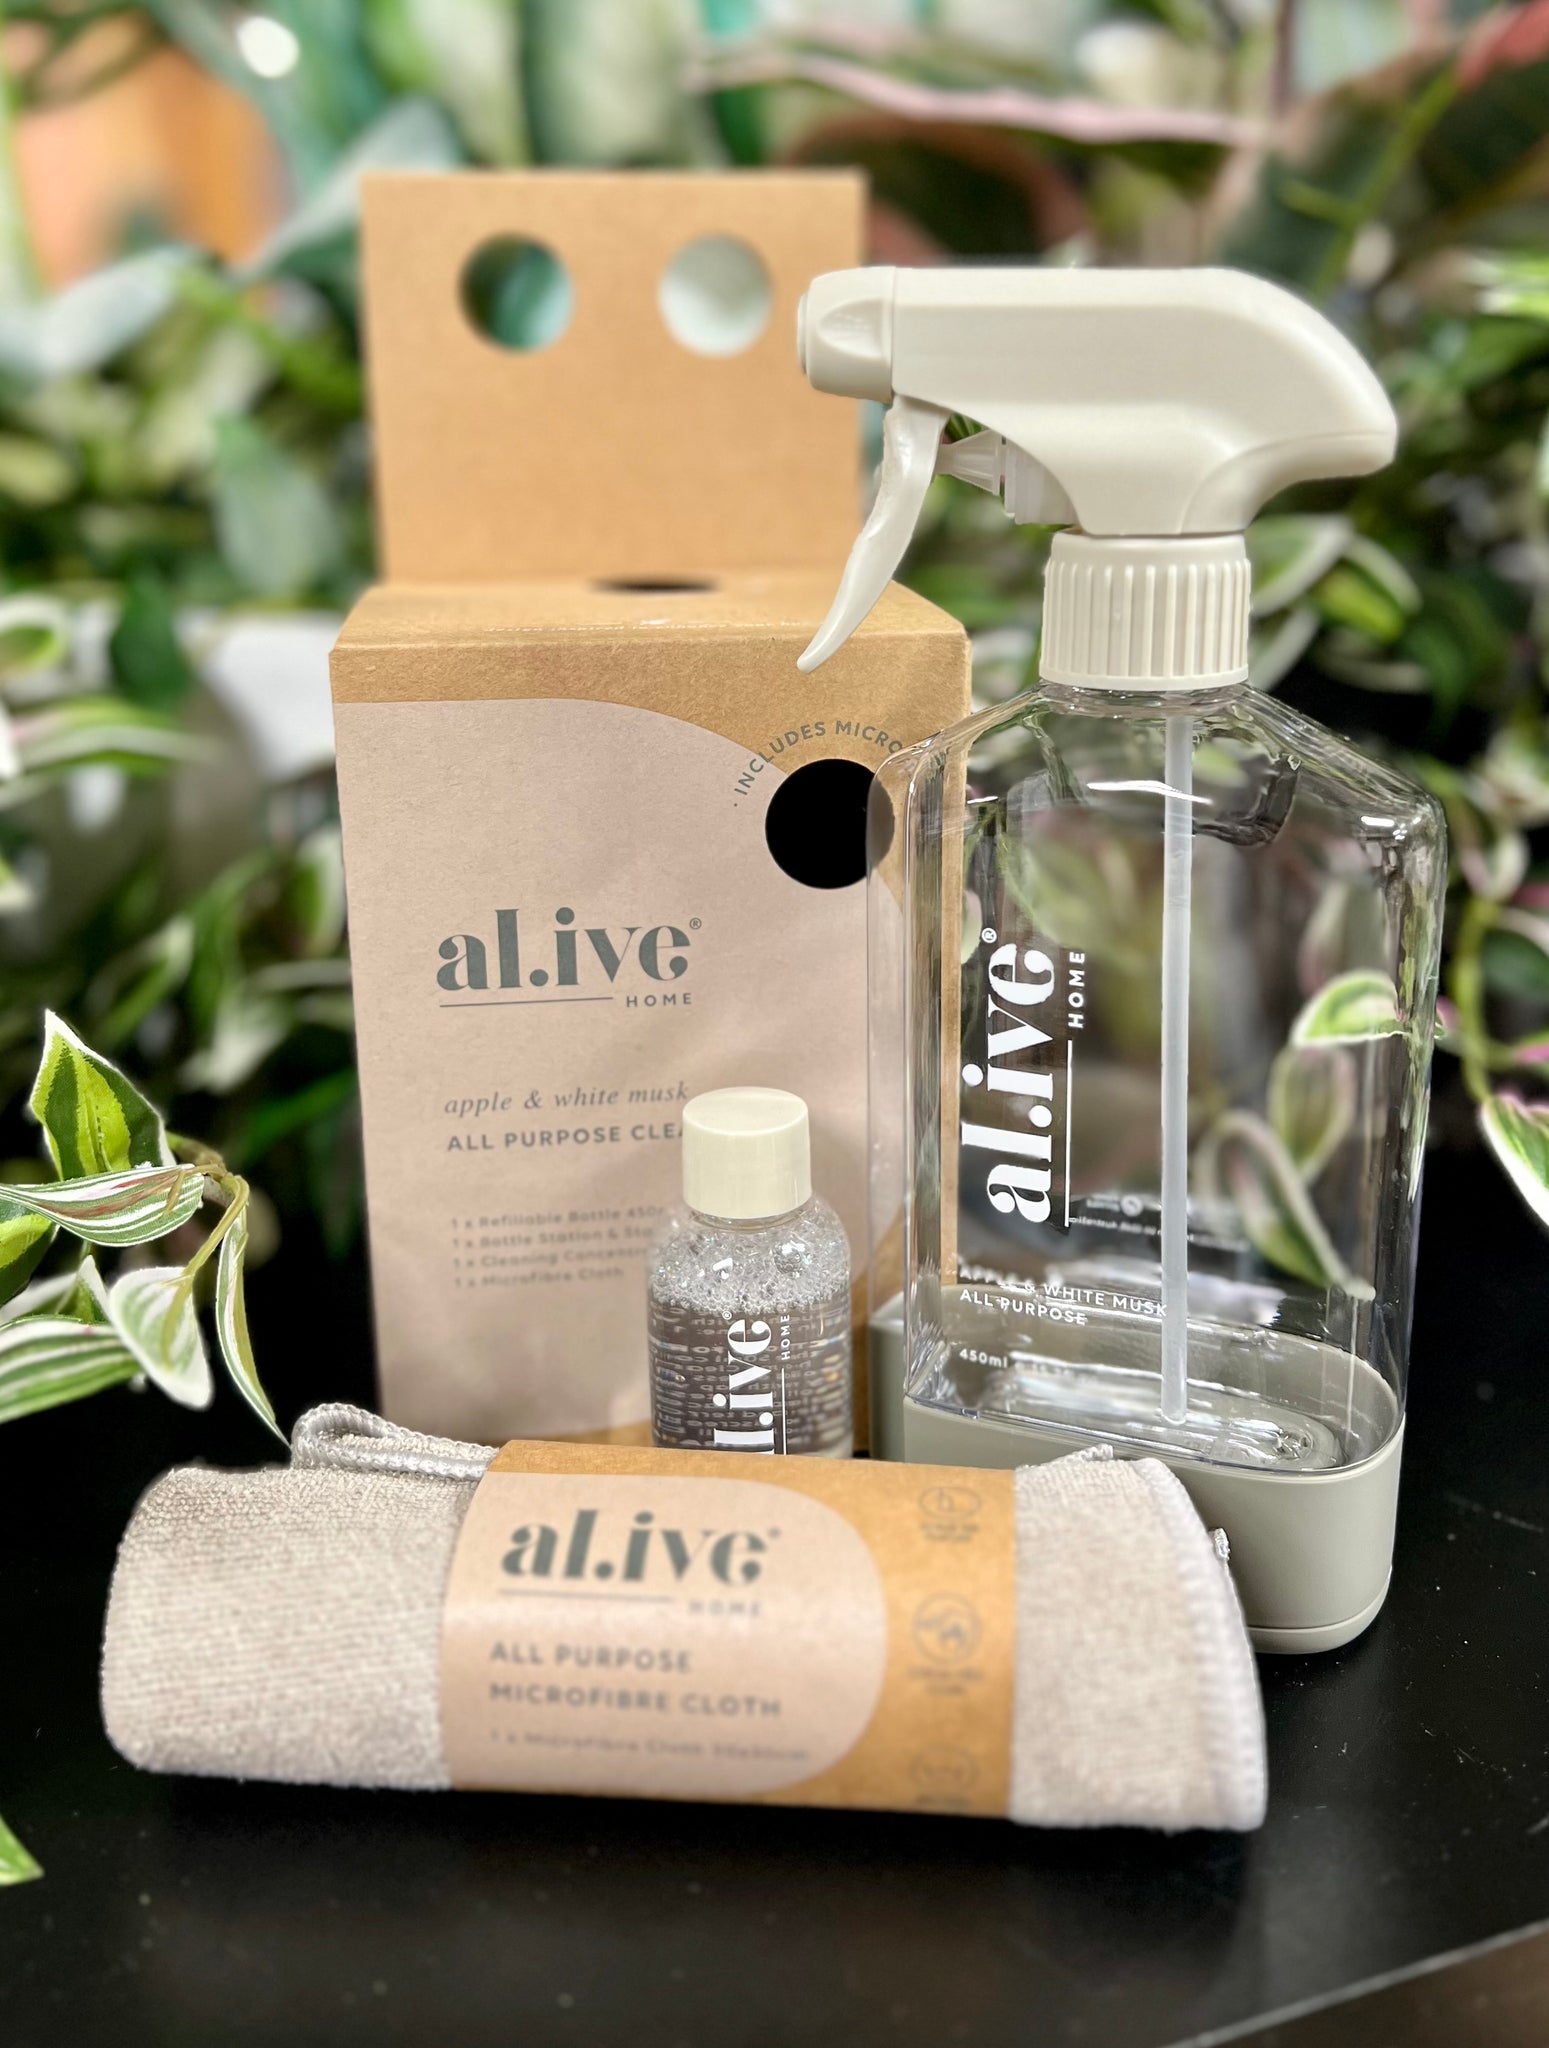 AL.IVE - ALL PURPOSE CLEANING KIT